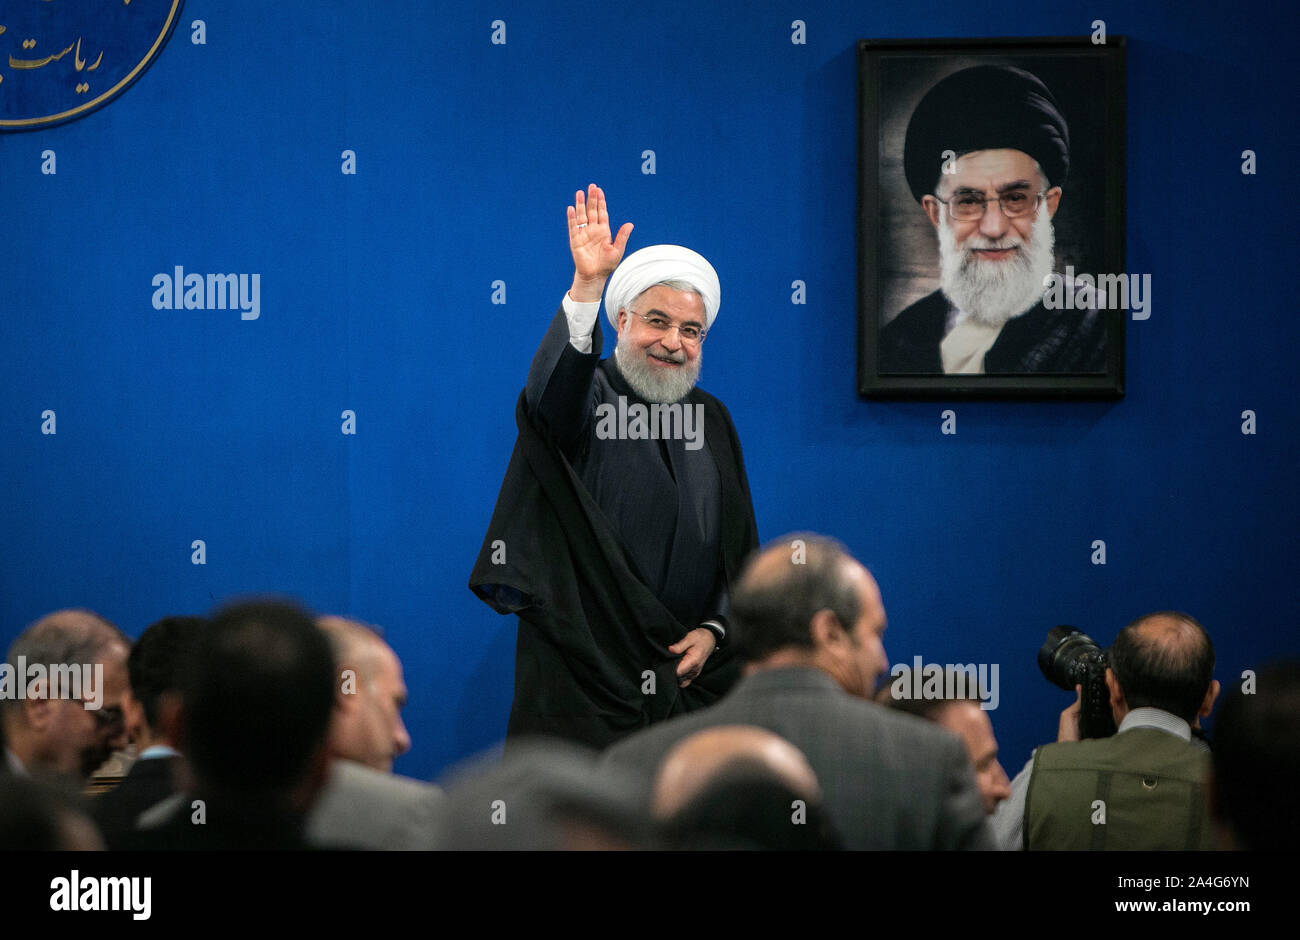 Tehran, Iran. 14th Oct, 2019. Iranian President Hassan Rouhani waves after a press conference in Tehran, Iran, on Oct. 14, 2019. Iranian President Hassan Rouhani said on Monday that his country does not endorse Turkey's approach to the current issues in northern Syria. Credit: Ahmad Halabisaz/Xinhua/Alamy Live News Stock Photo